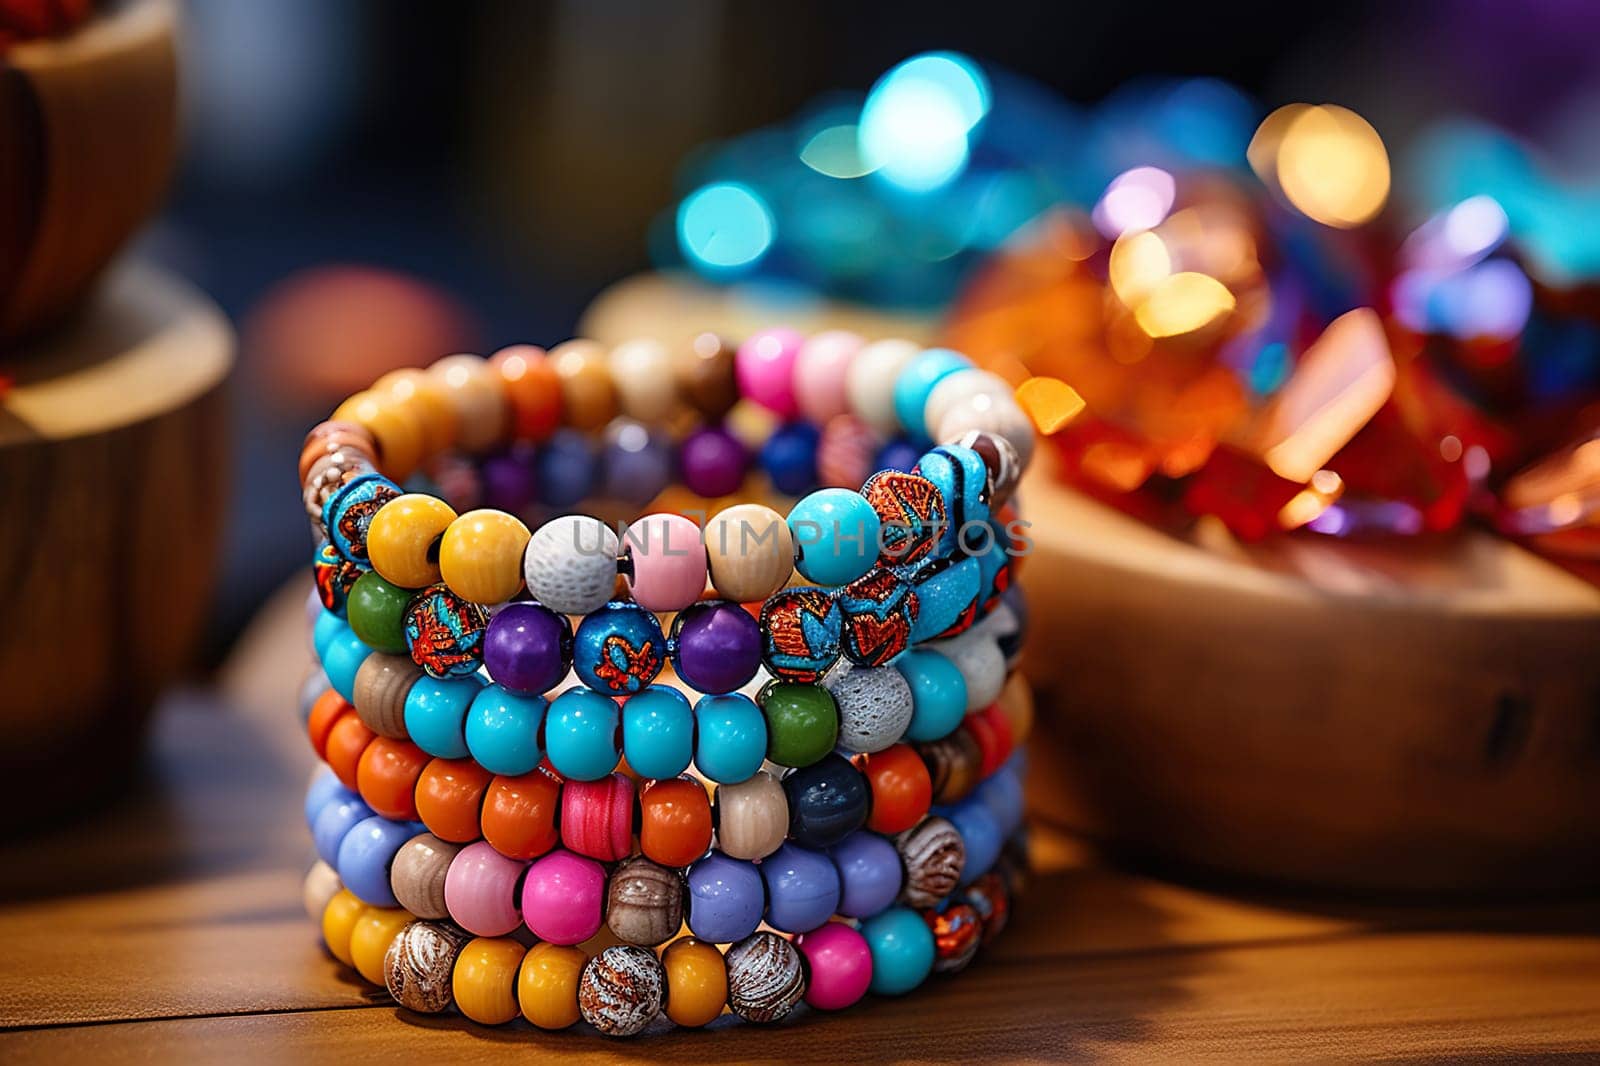 Stack of bracelets made of beads on a wooden table. Children's jewelry.